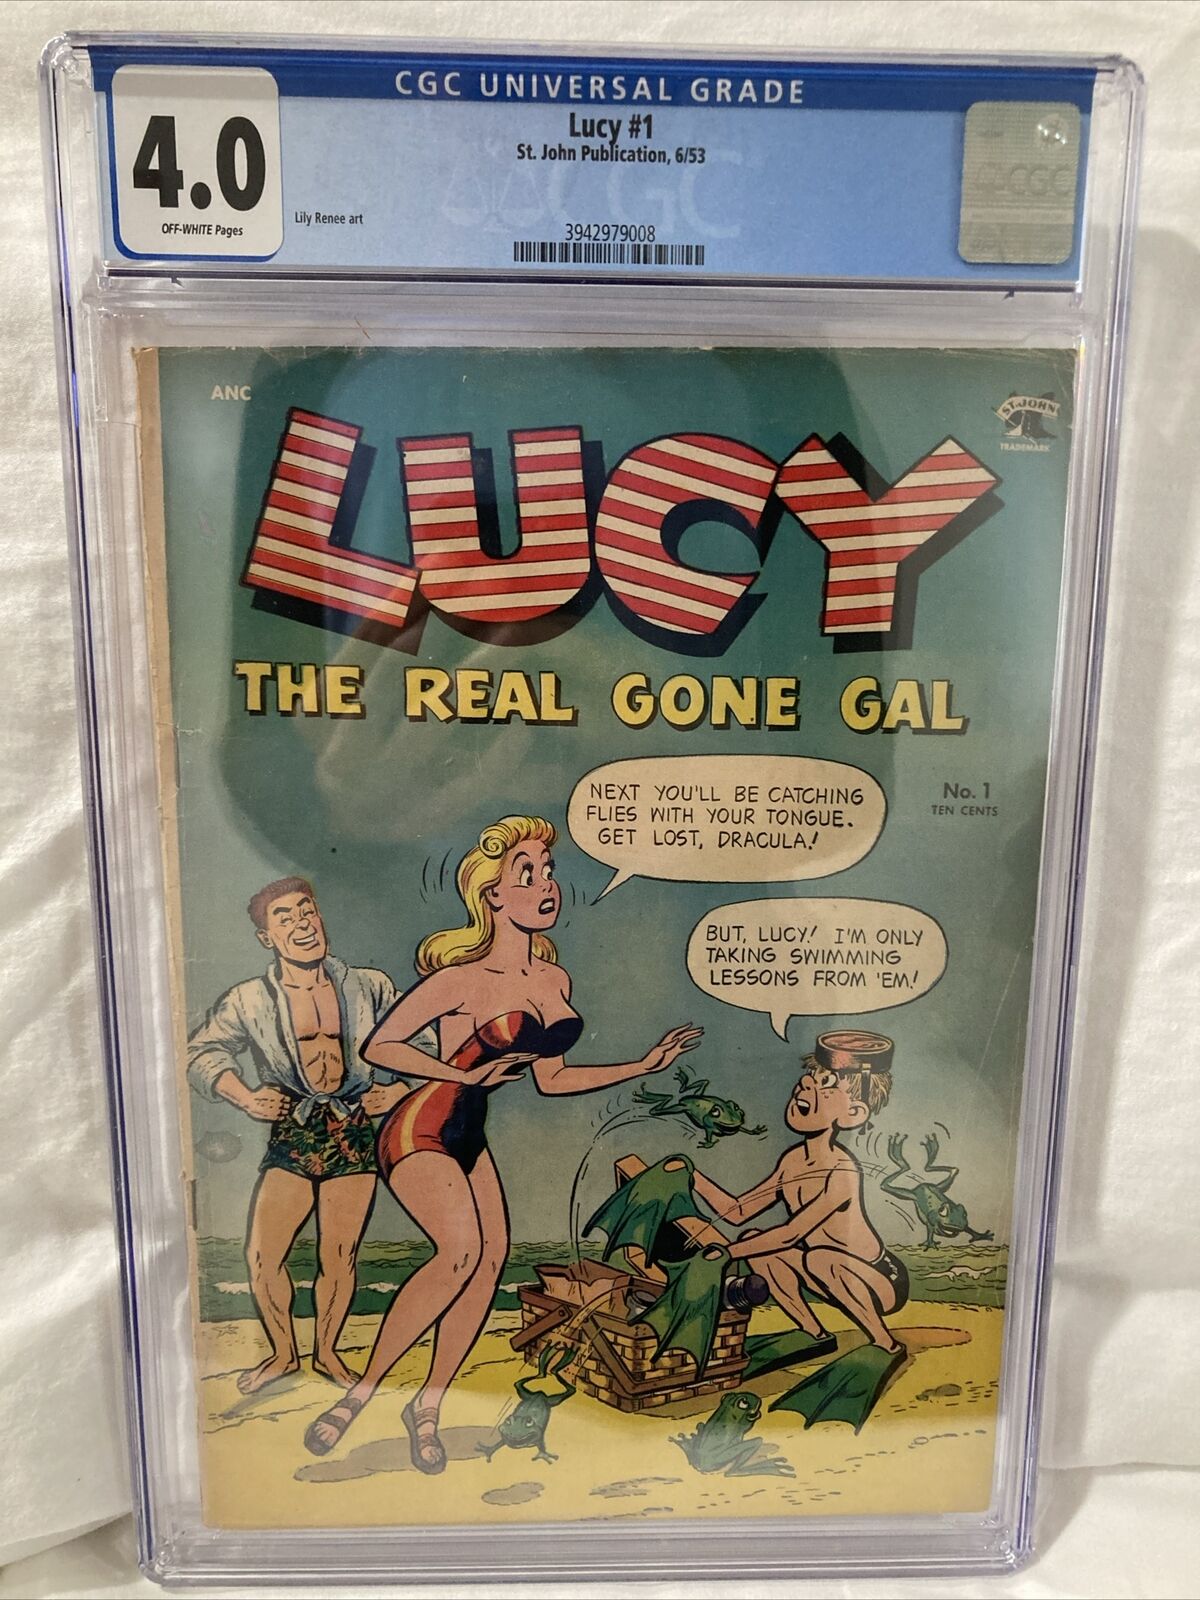 Lucy, The Real Gone Gal #1 (St. John, 1953) Golden Age, Rare, CGC Graded (4.0)